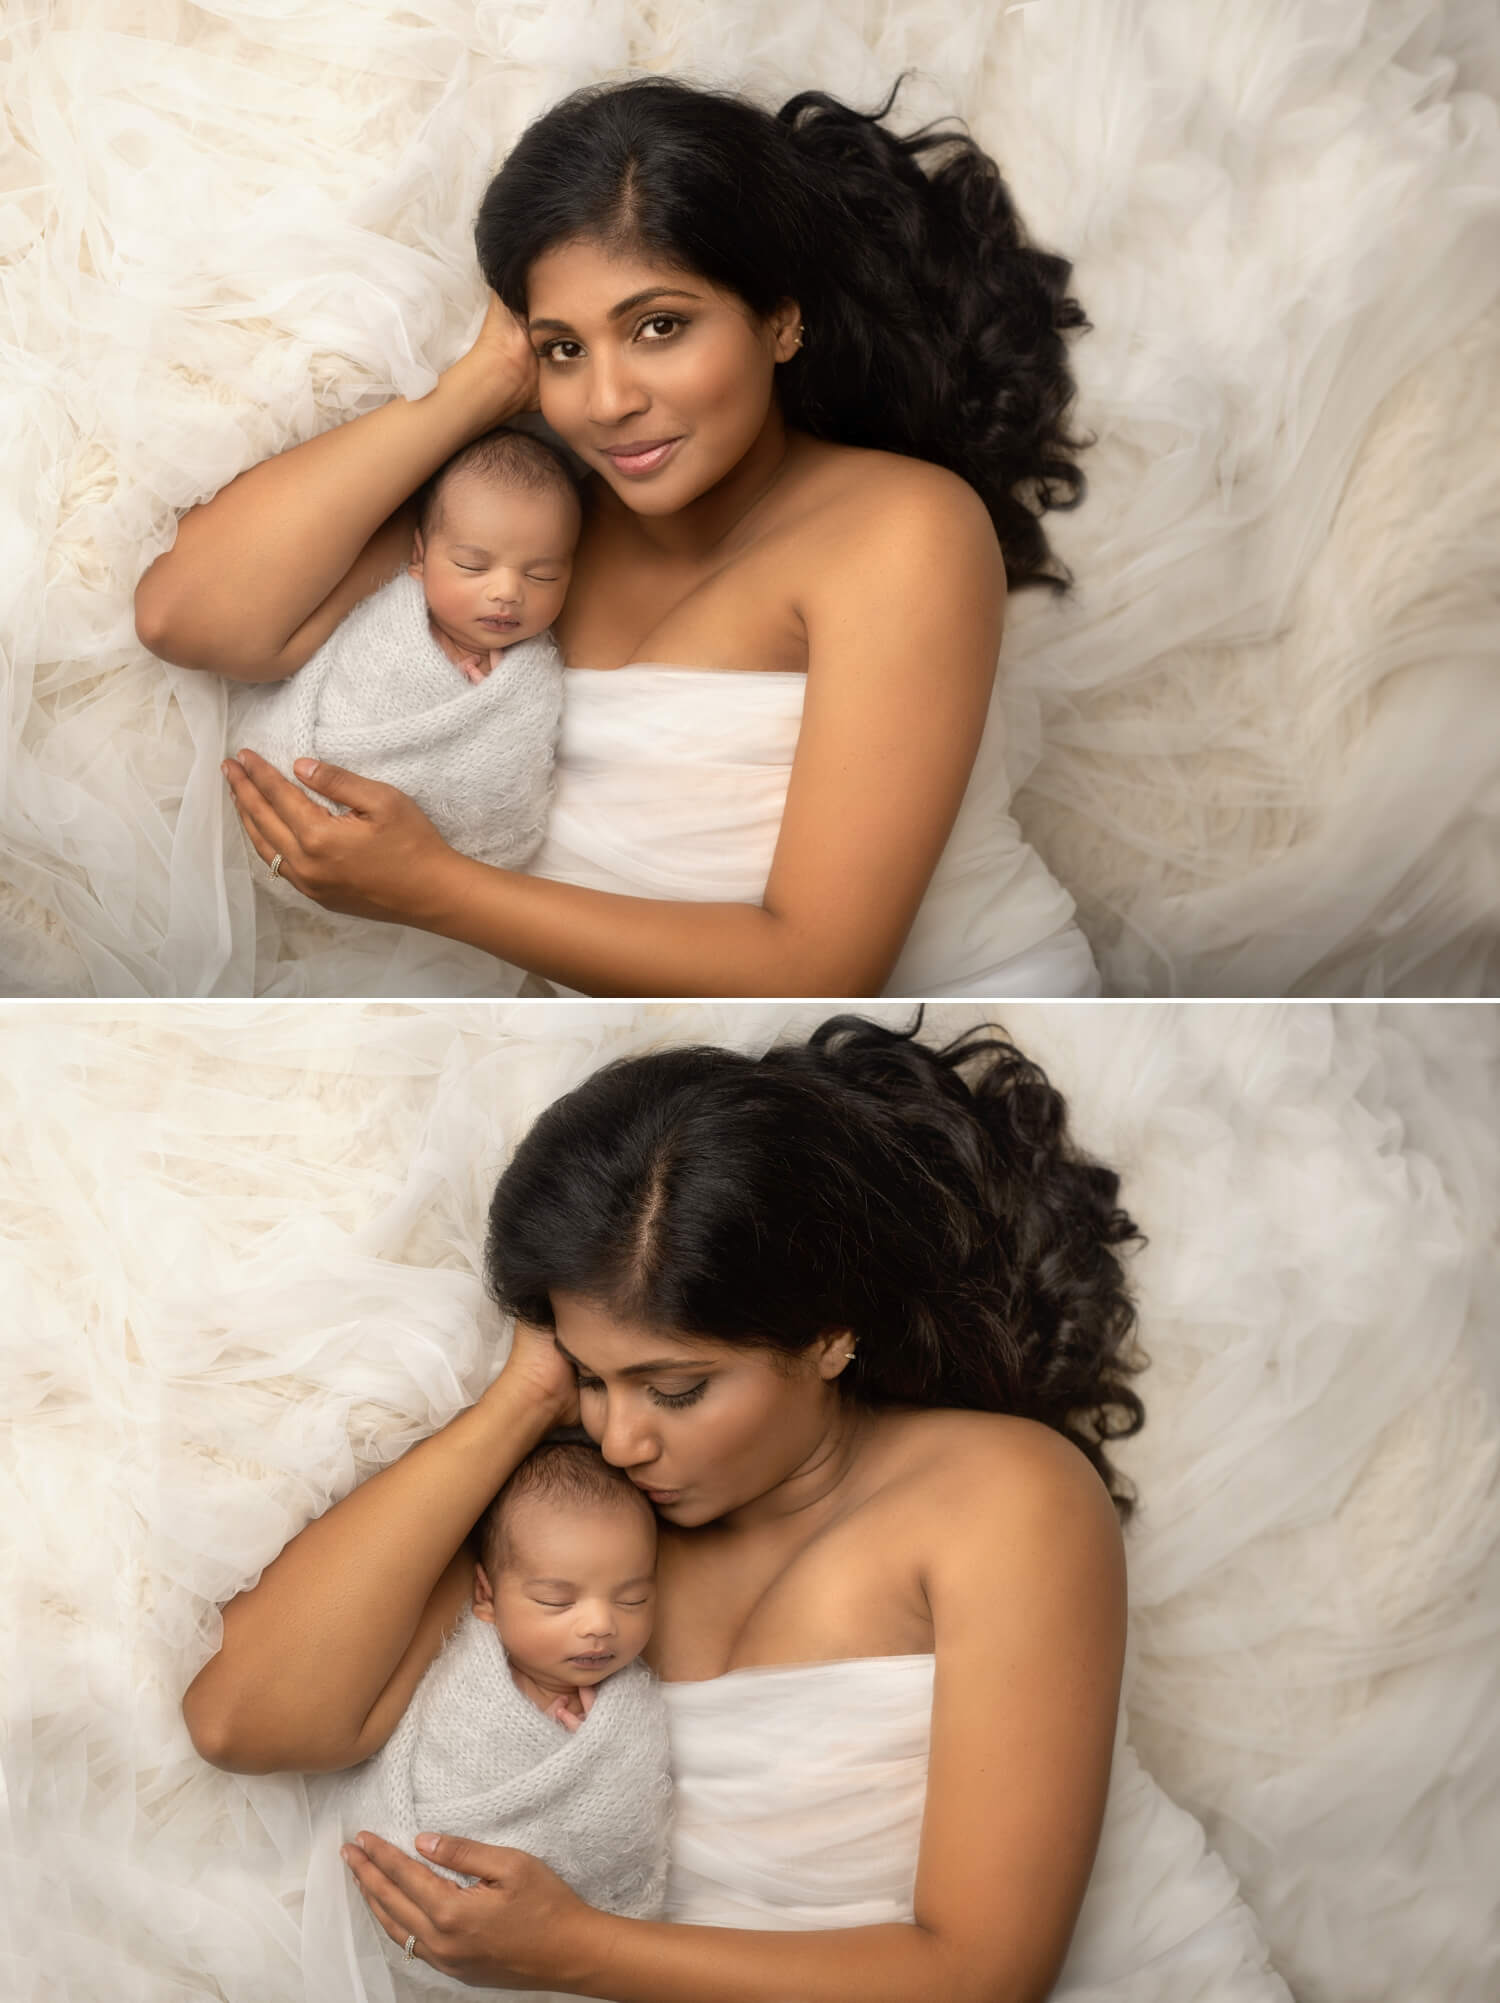 best newborn and family photography in san diego